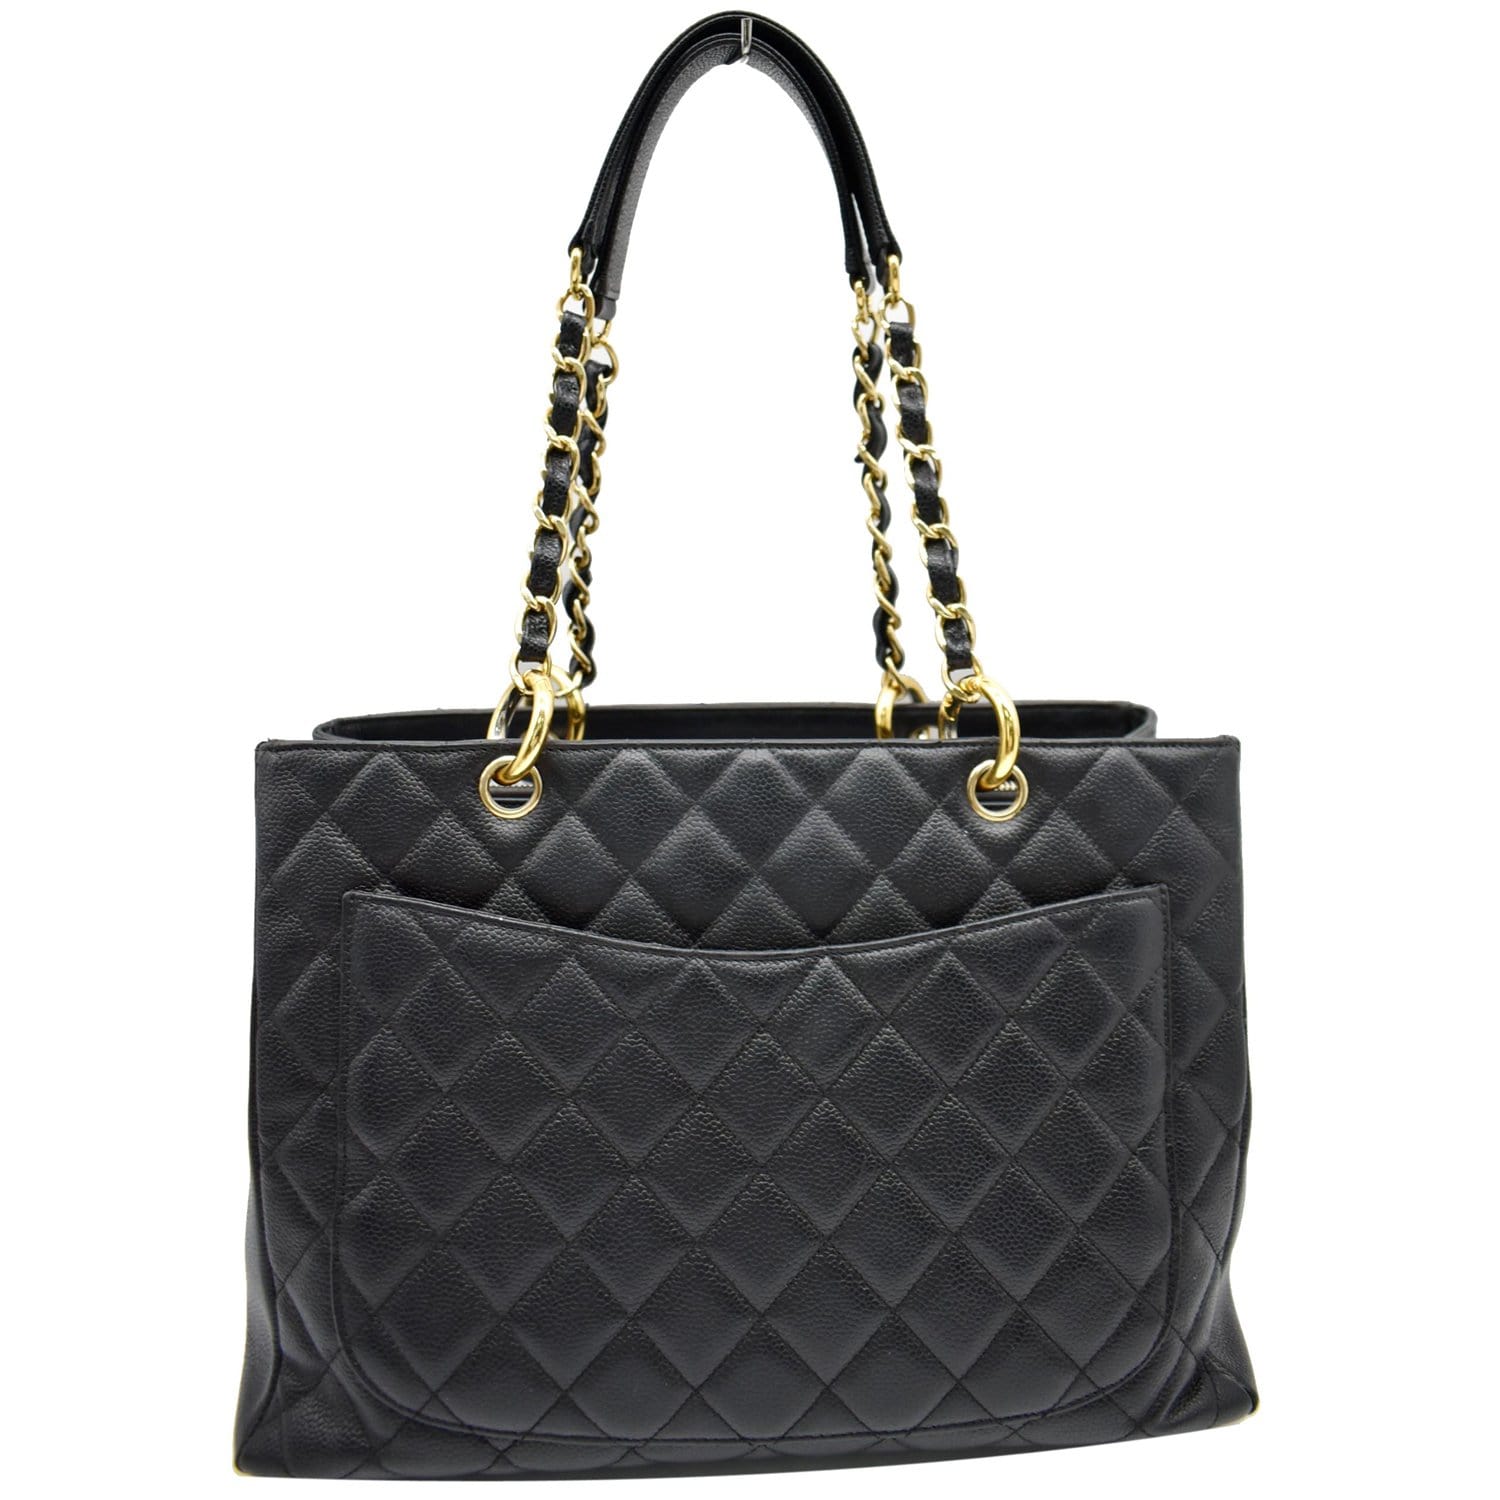 Sold at Auction: CHANEL - GST LARGE CAVIAR LEATHER TOTE BAG - EMBROIDERED  CC LOGO